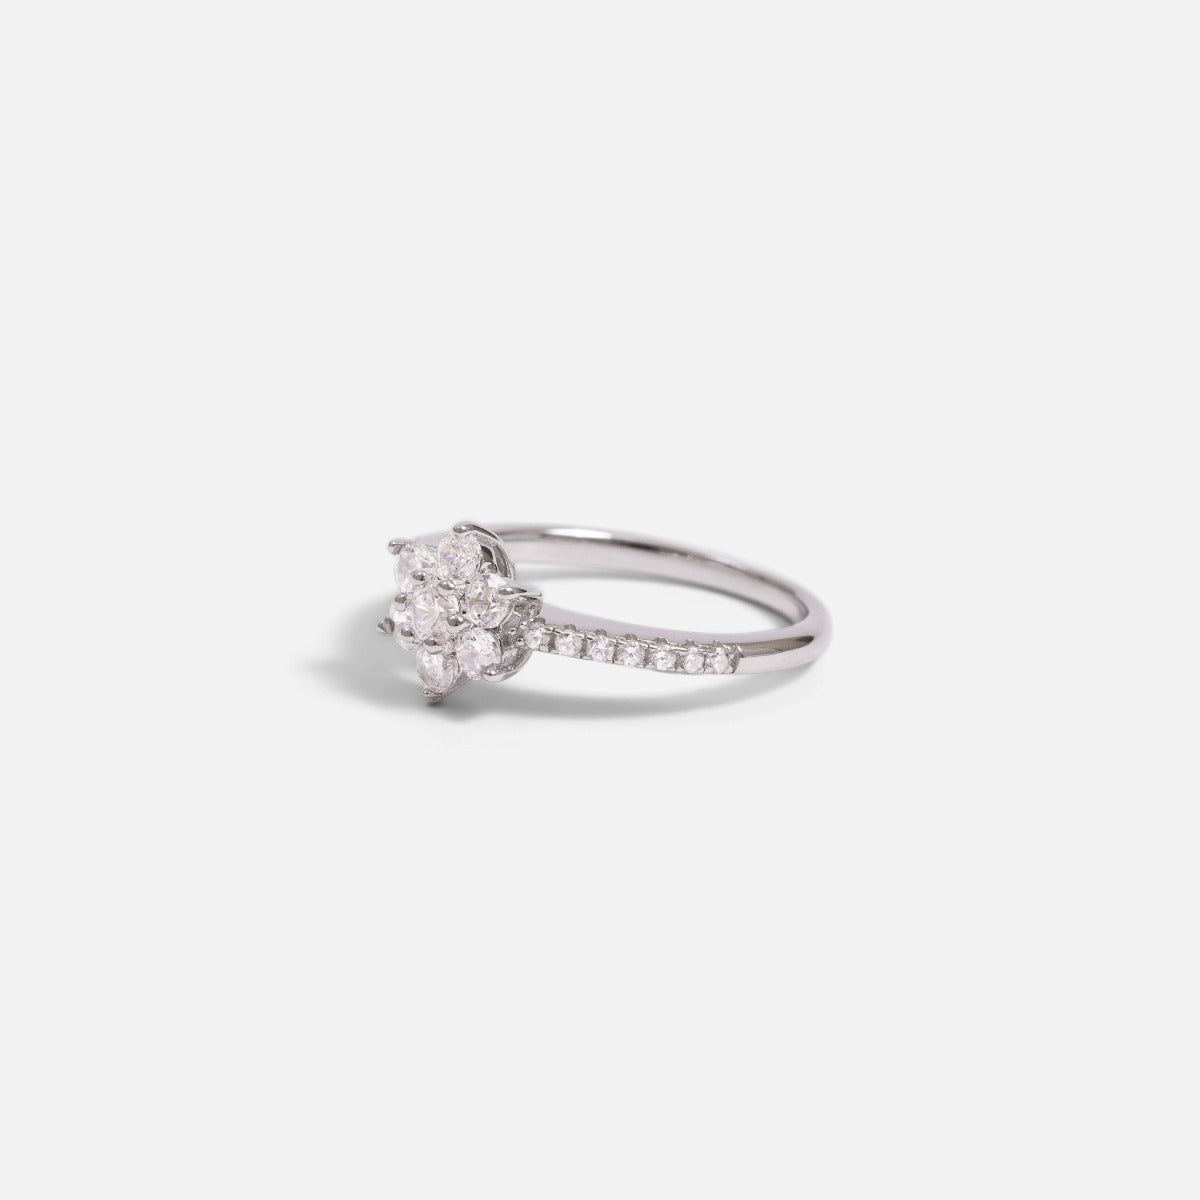 Sterling silver ring and star shaped cubic zirconia stone